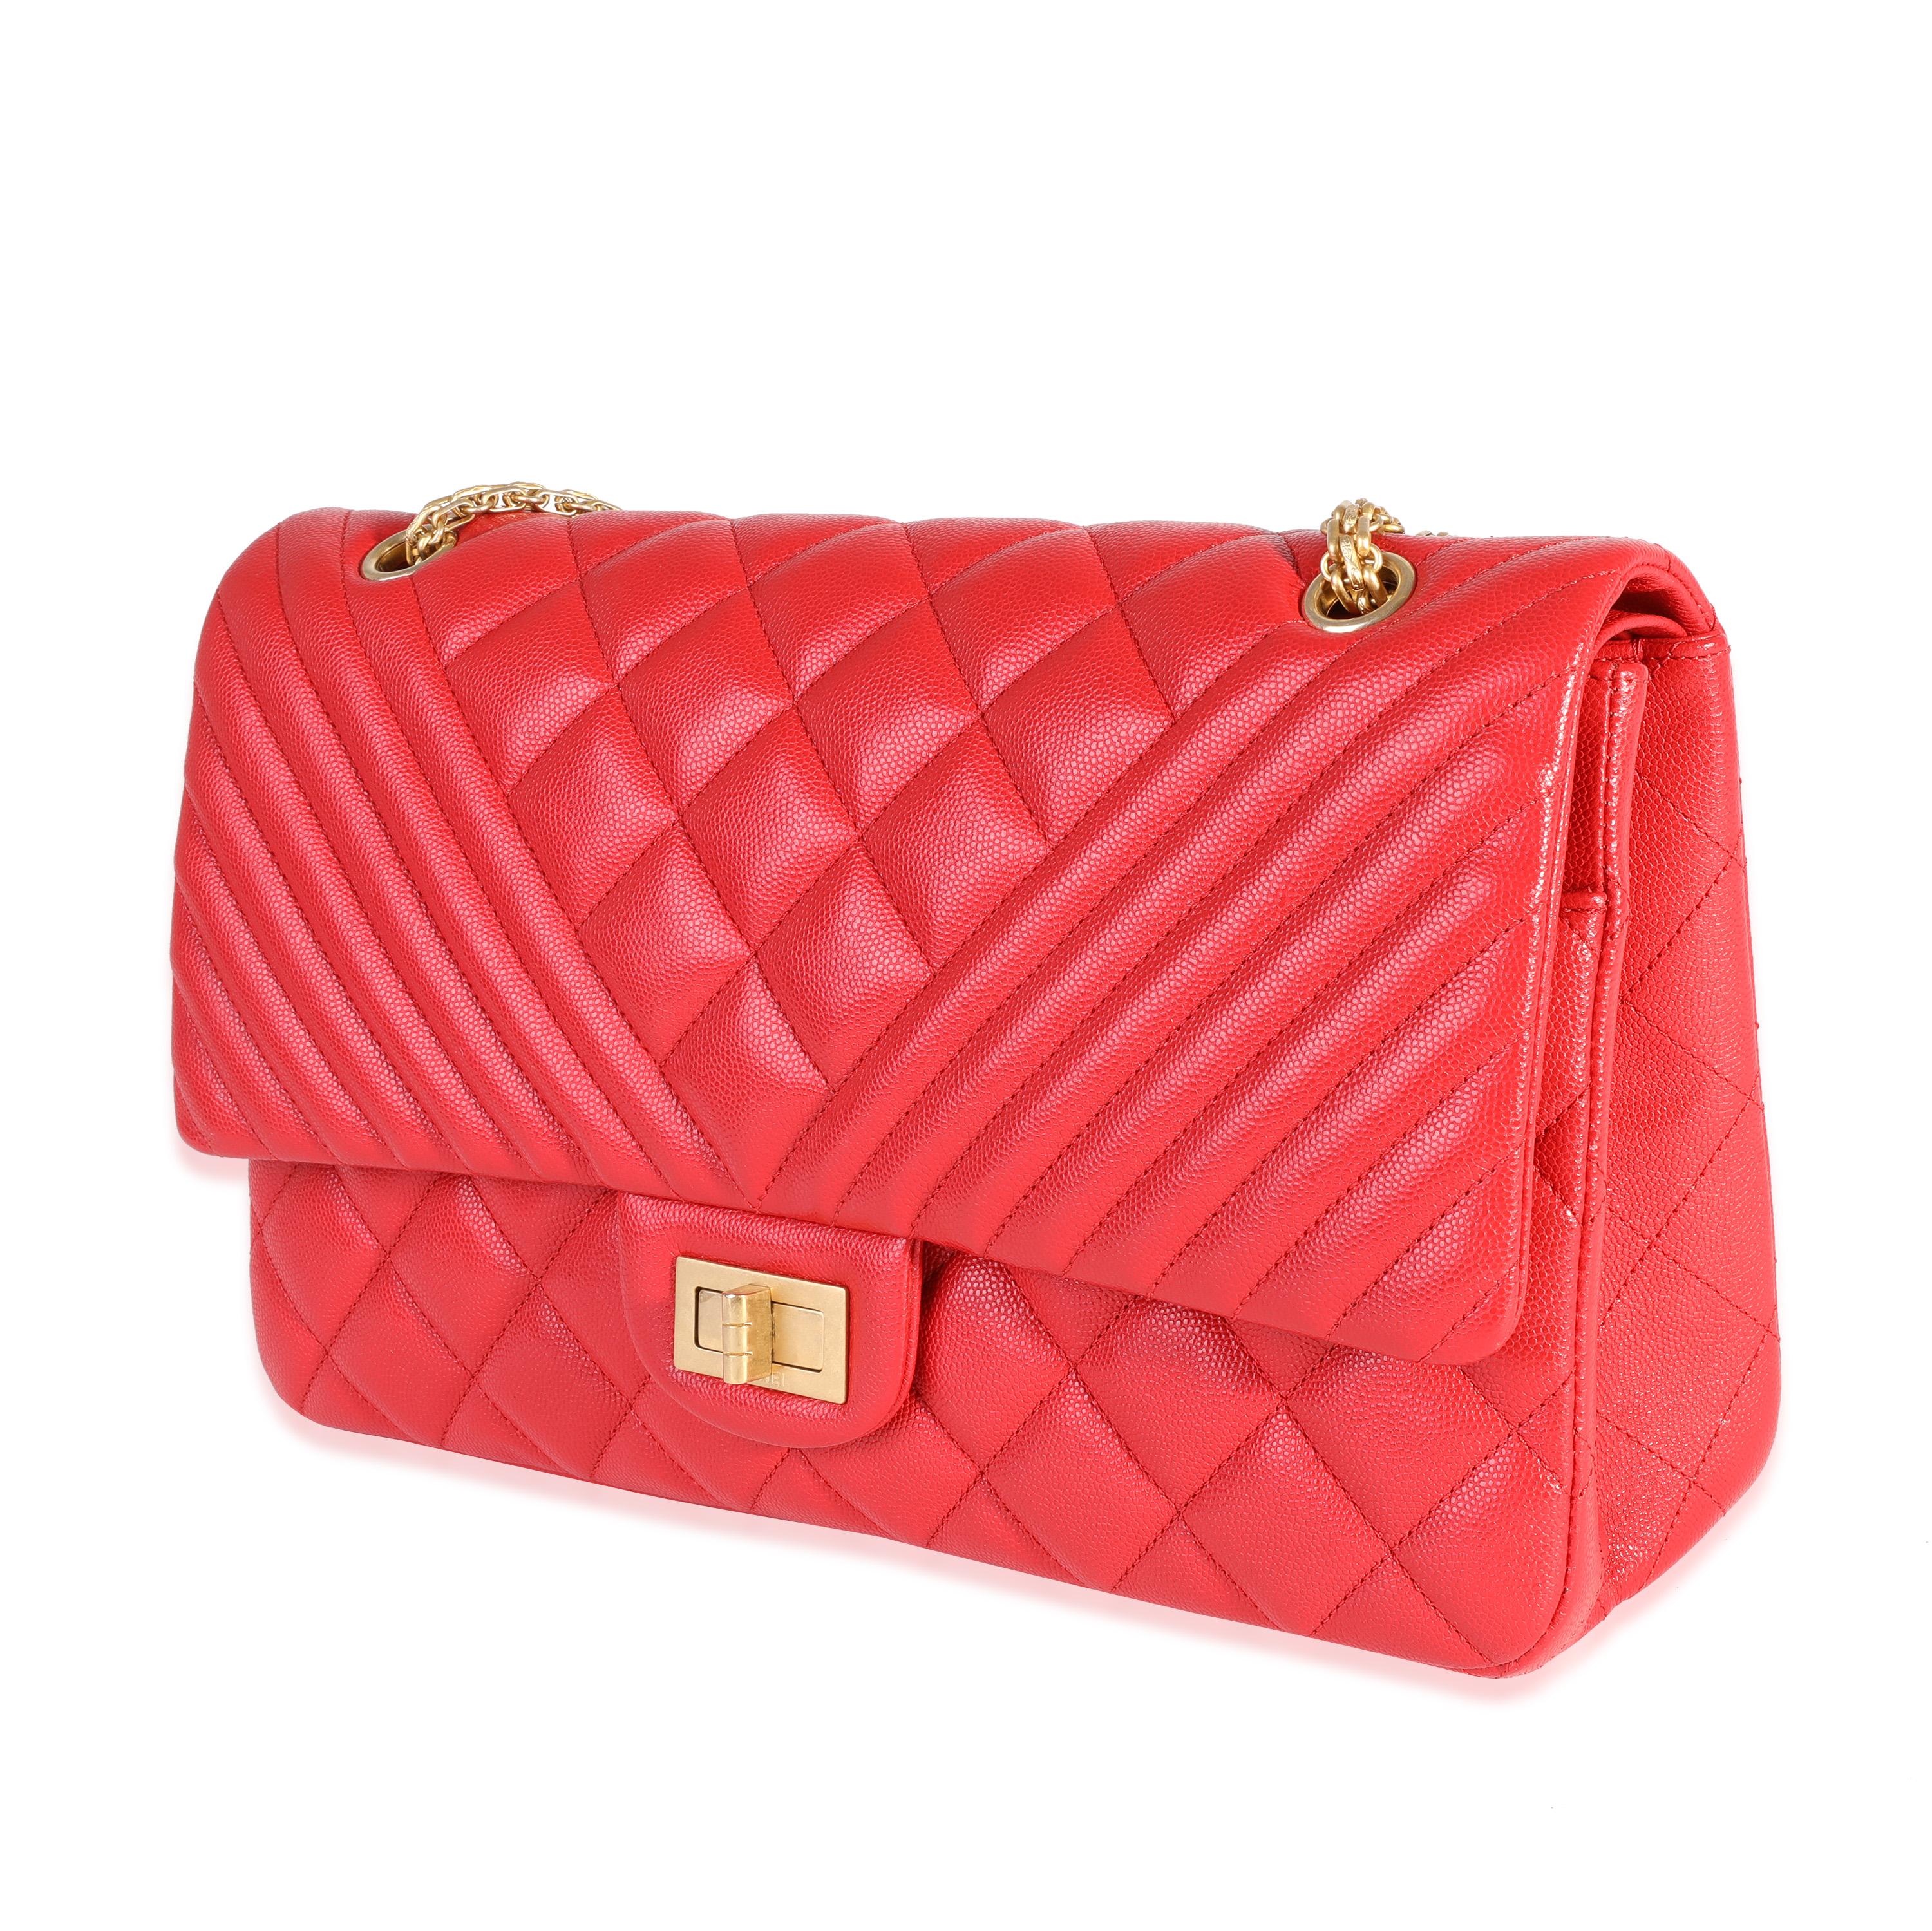 Chanel Red Quilted Caviar Reissue 2.55 227 Double Flap Bag In Excellent Condition For Sale In New York, NY